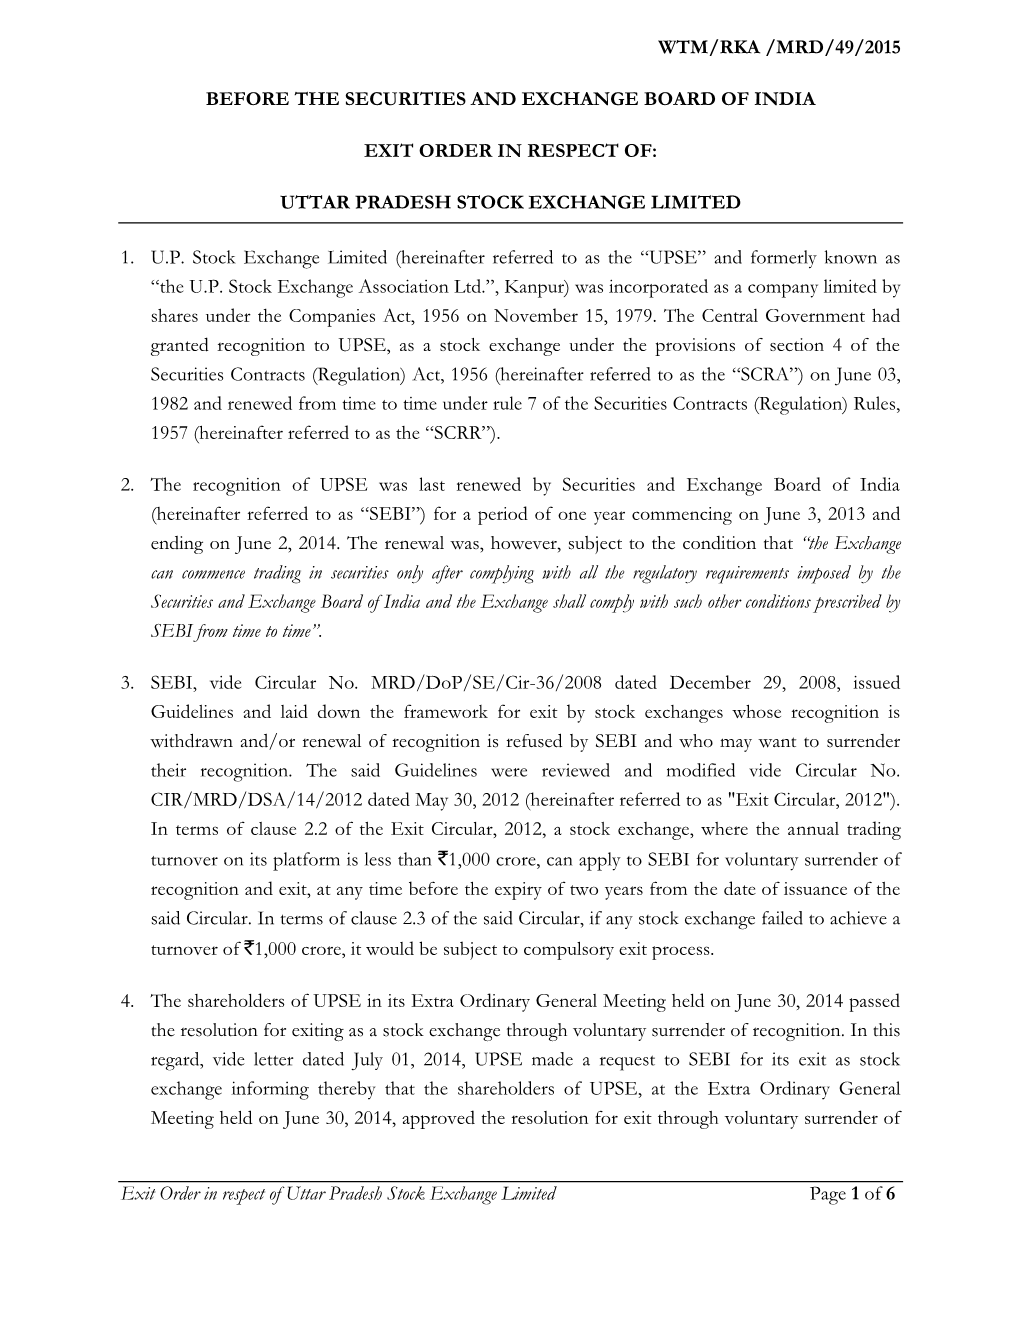 Exit Order in Respect of Uttar Pradesh Stock Exchange Limited Page 1 of 6